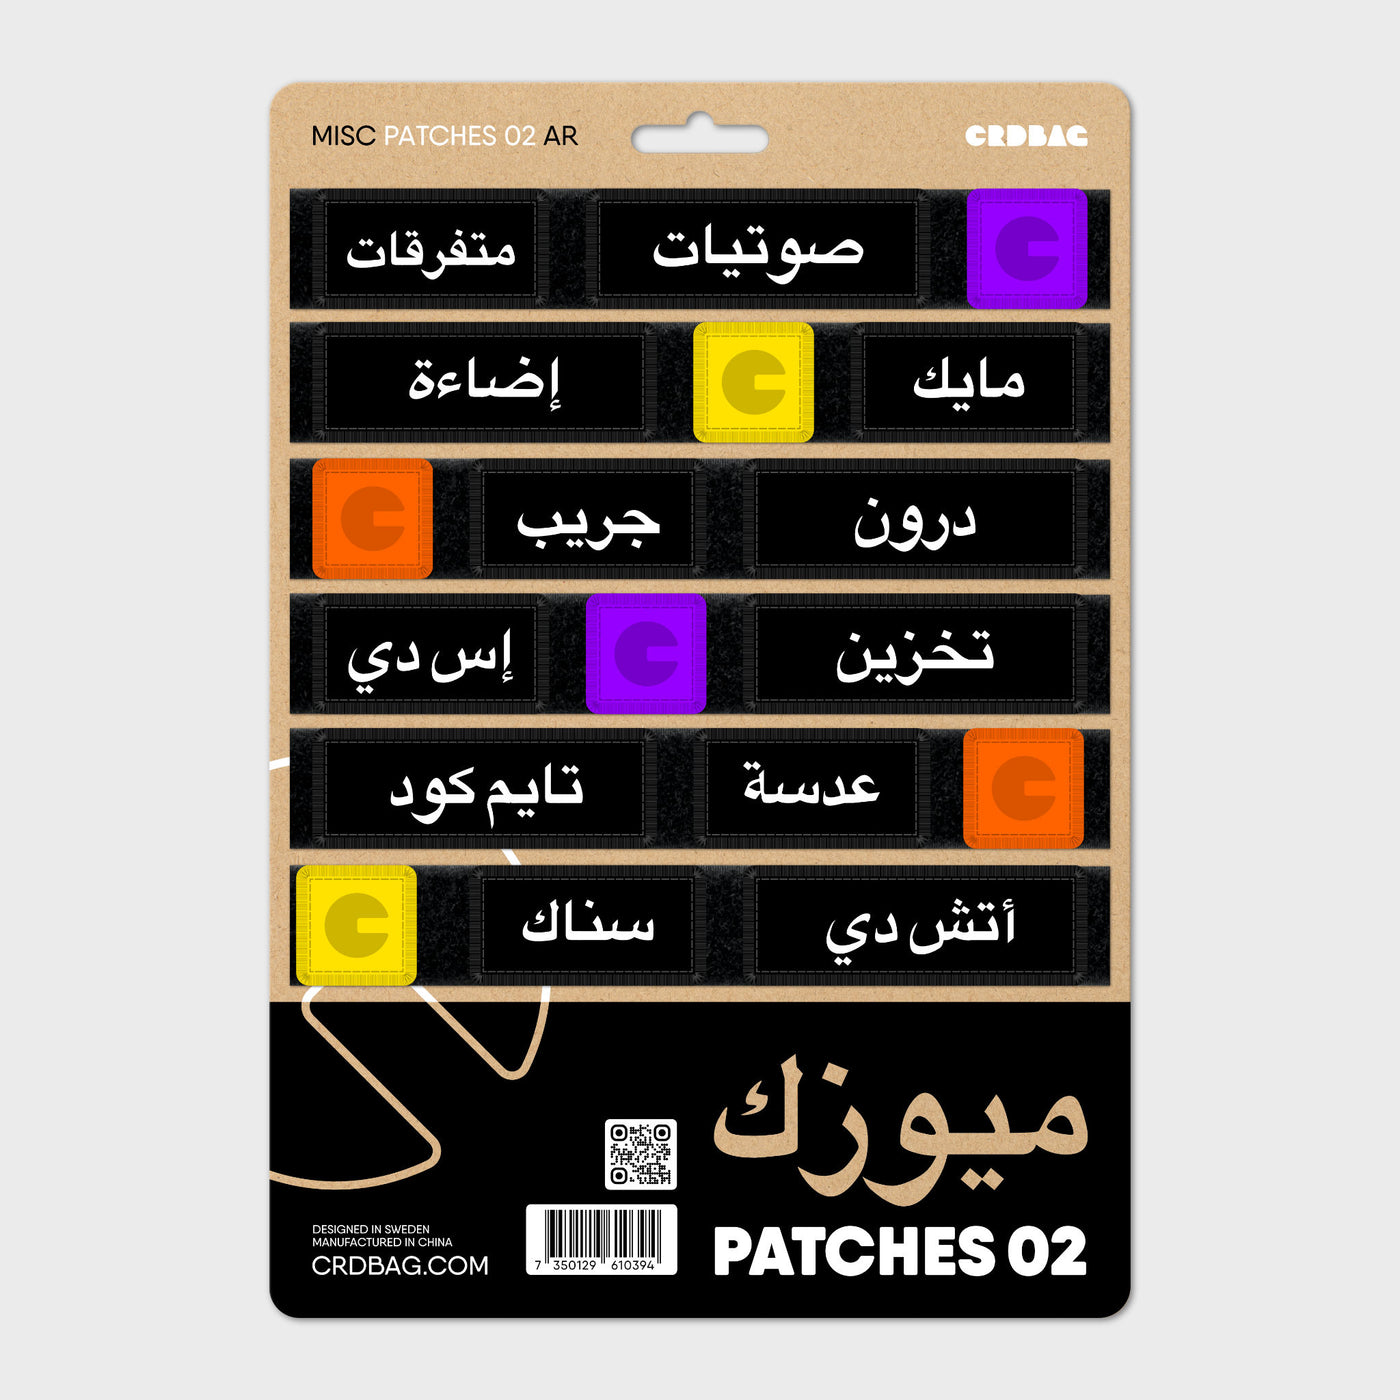 Misc Patches 02 (AR)